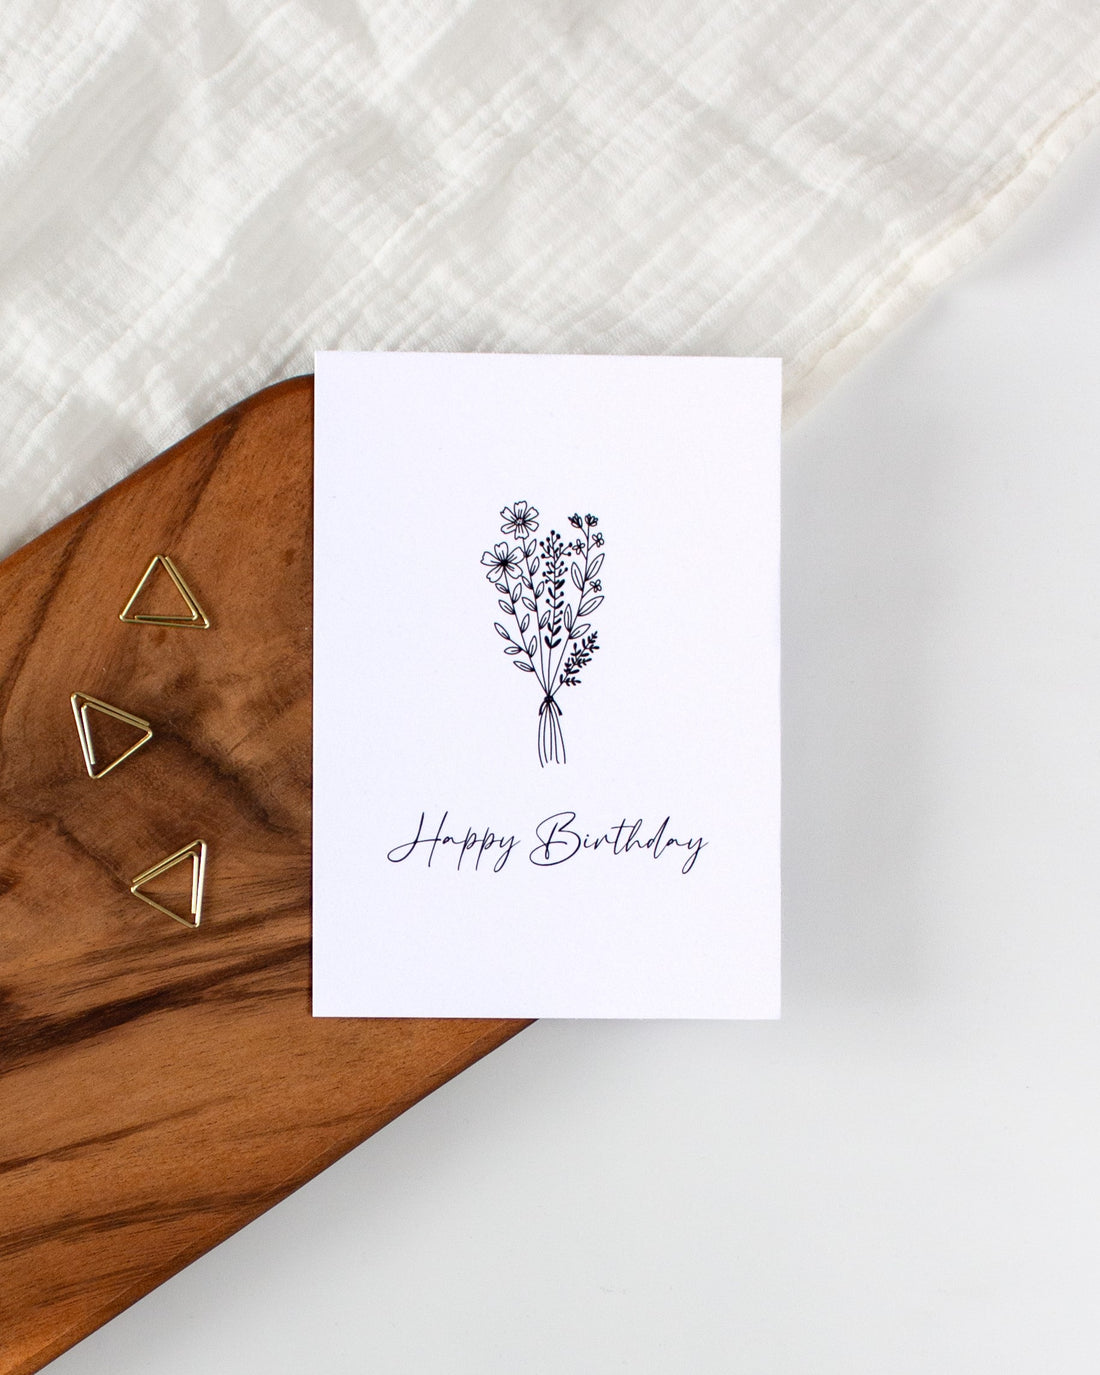 A postcard laying on a wooden board with some golden triangle paperclips and a white cloth in the background. The postcard design consists of a line art drawing of a bunch of flowers tied together and some cursive writing saying &quot;Happy Birthday&quot; below that.